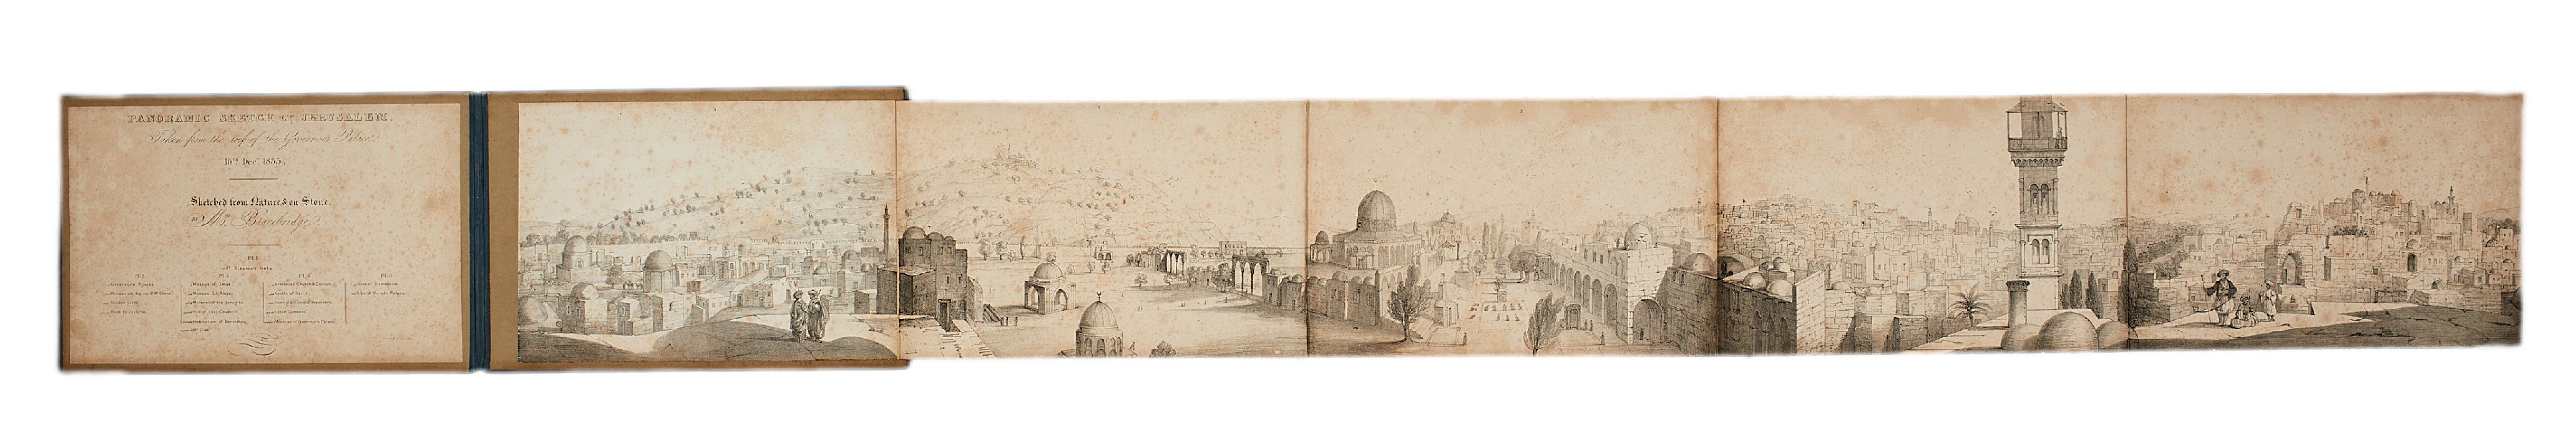 Ɵ Panormic Sketch of Jerusalem, taken from the Governor's Palace, from sketches by Mrs Bracebridge